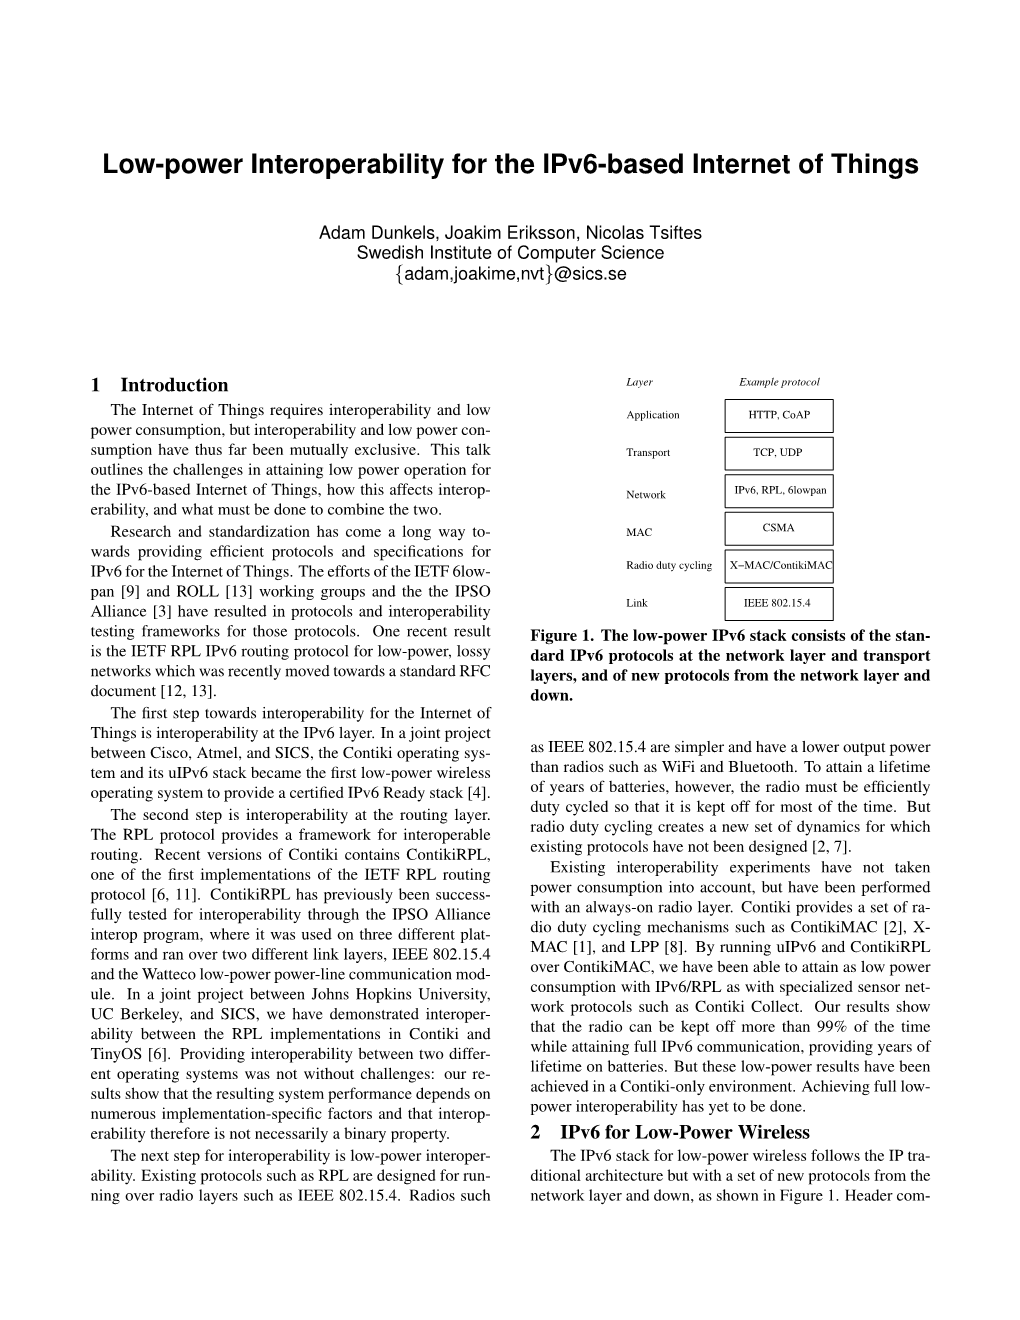 Low-Power Interoperability for the Ipv6-Based Internet of Things